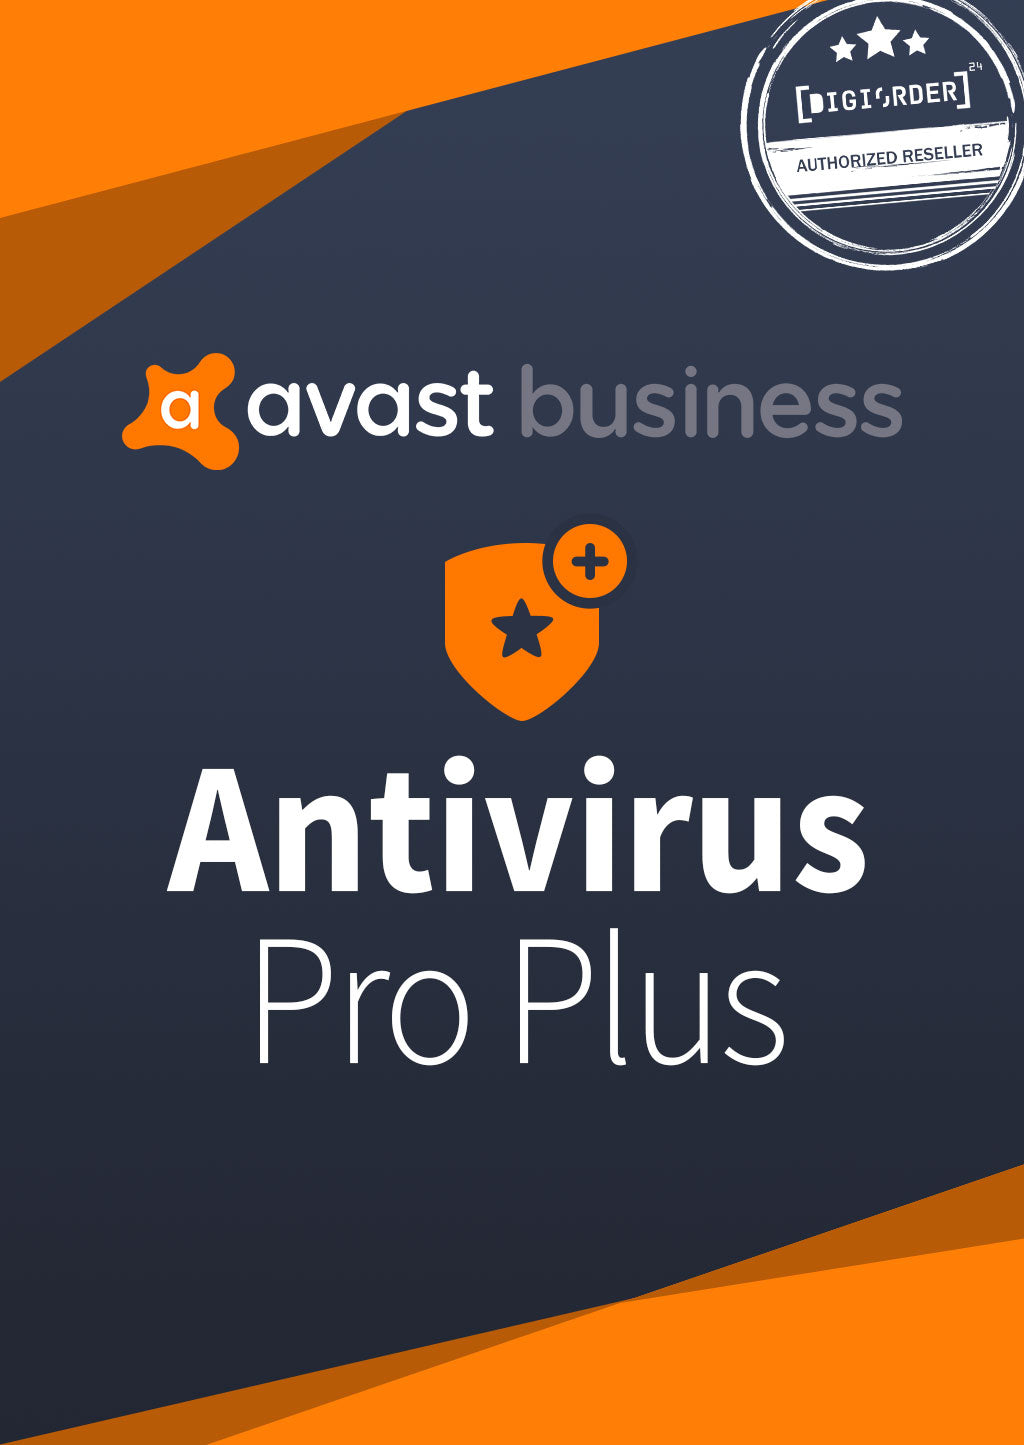 avast for macbook pro secure password